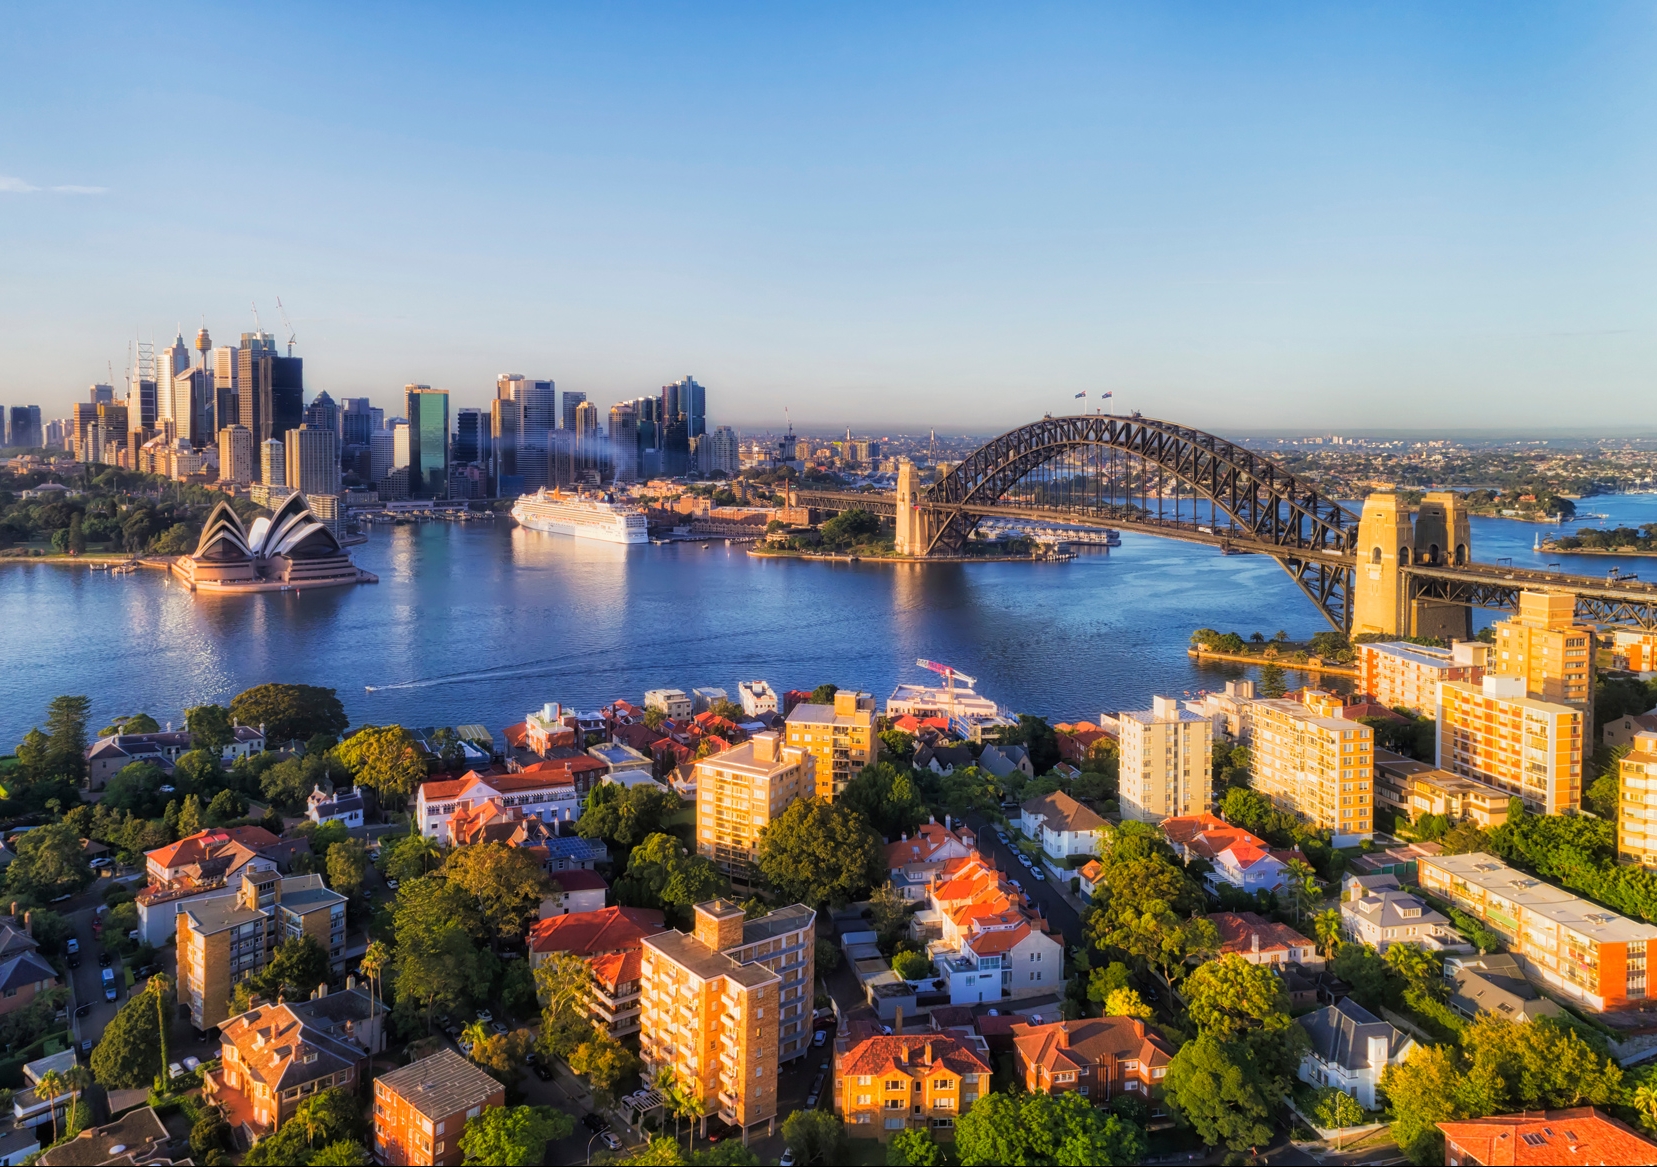 Using data analysis, Dr Chyi Lin Lee has investigated exactly how Sydney's heated housing market affects the regions. Photo: Shutterstock.